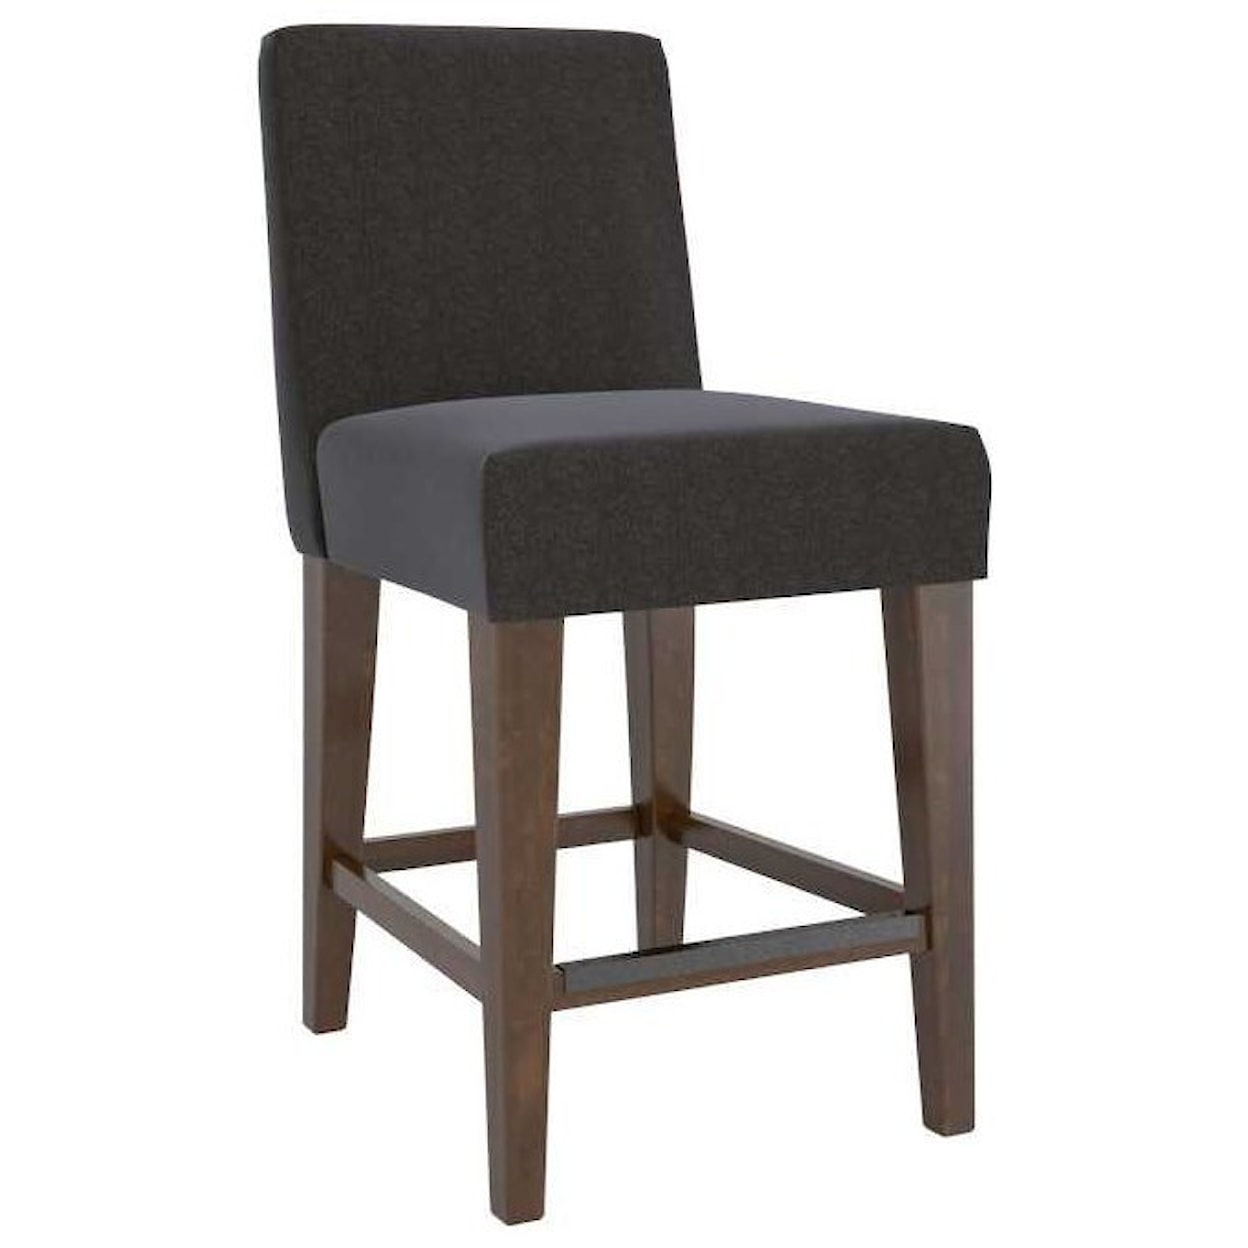 Canadel East Side Customizable Upholstered Stool